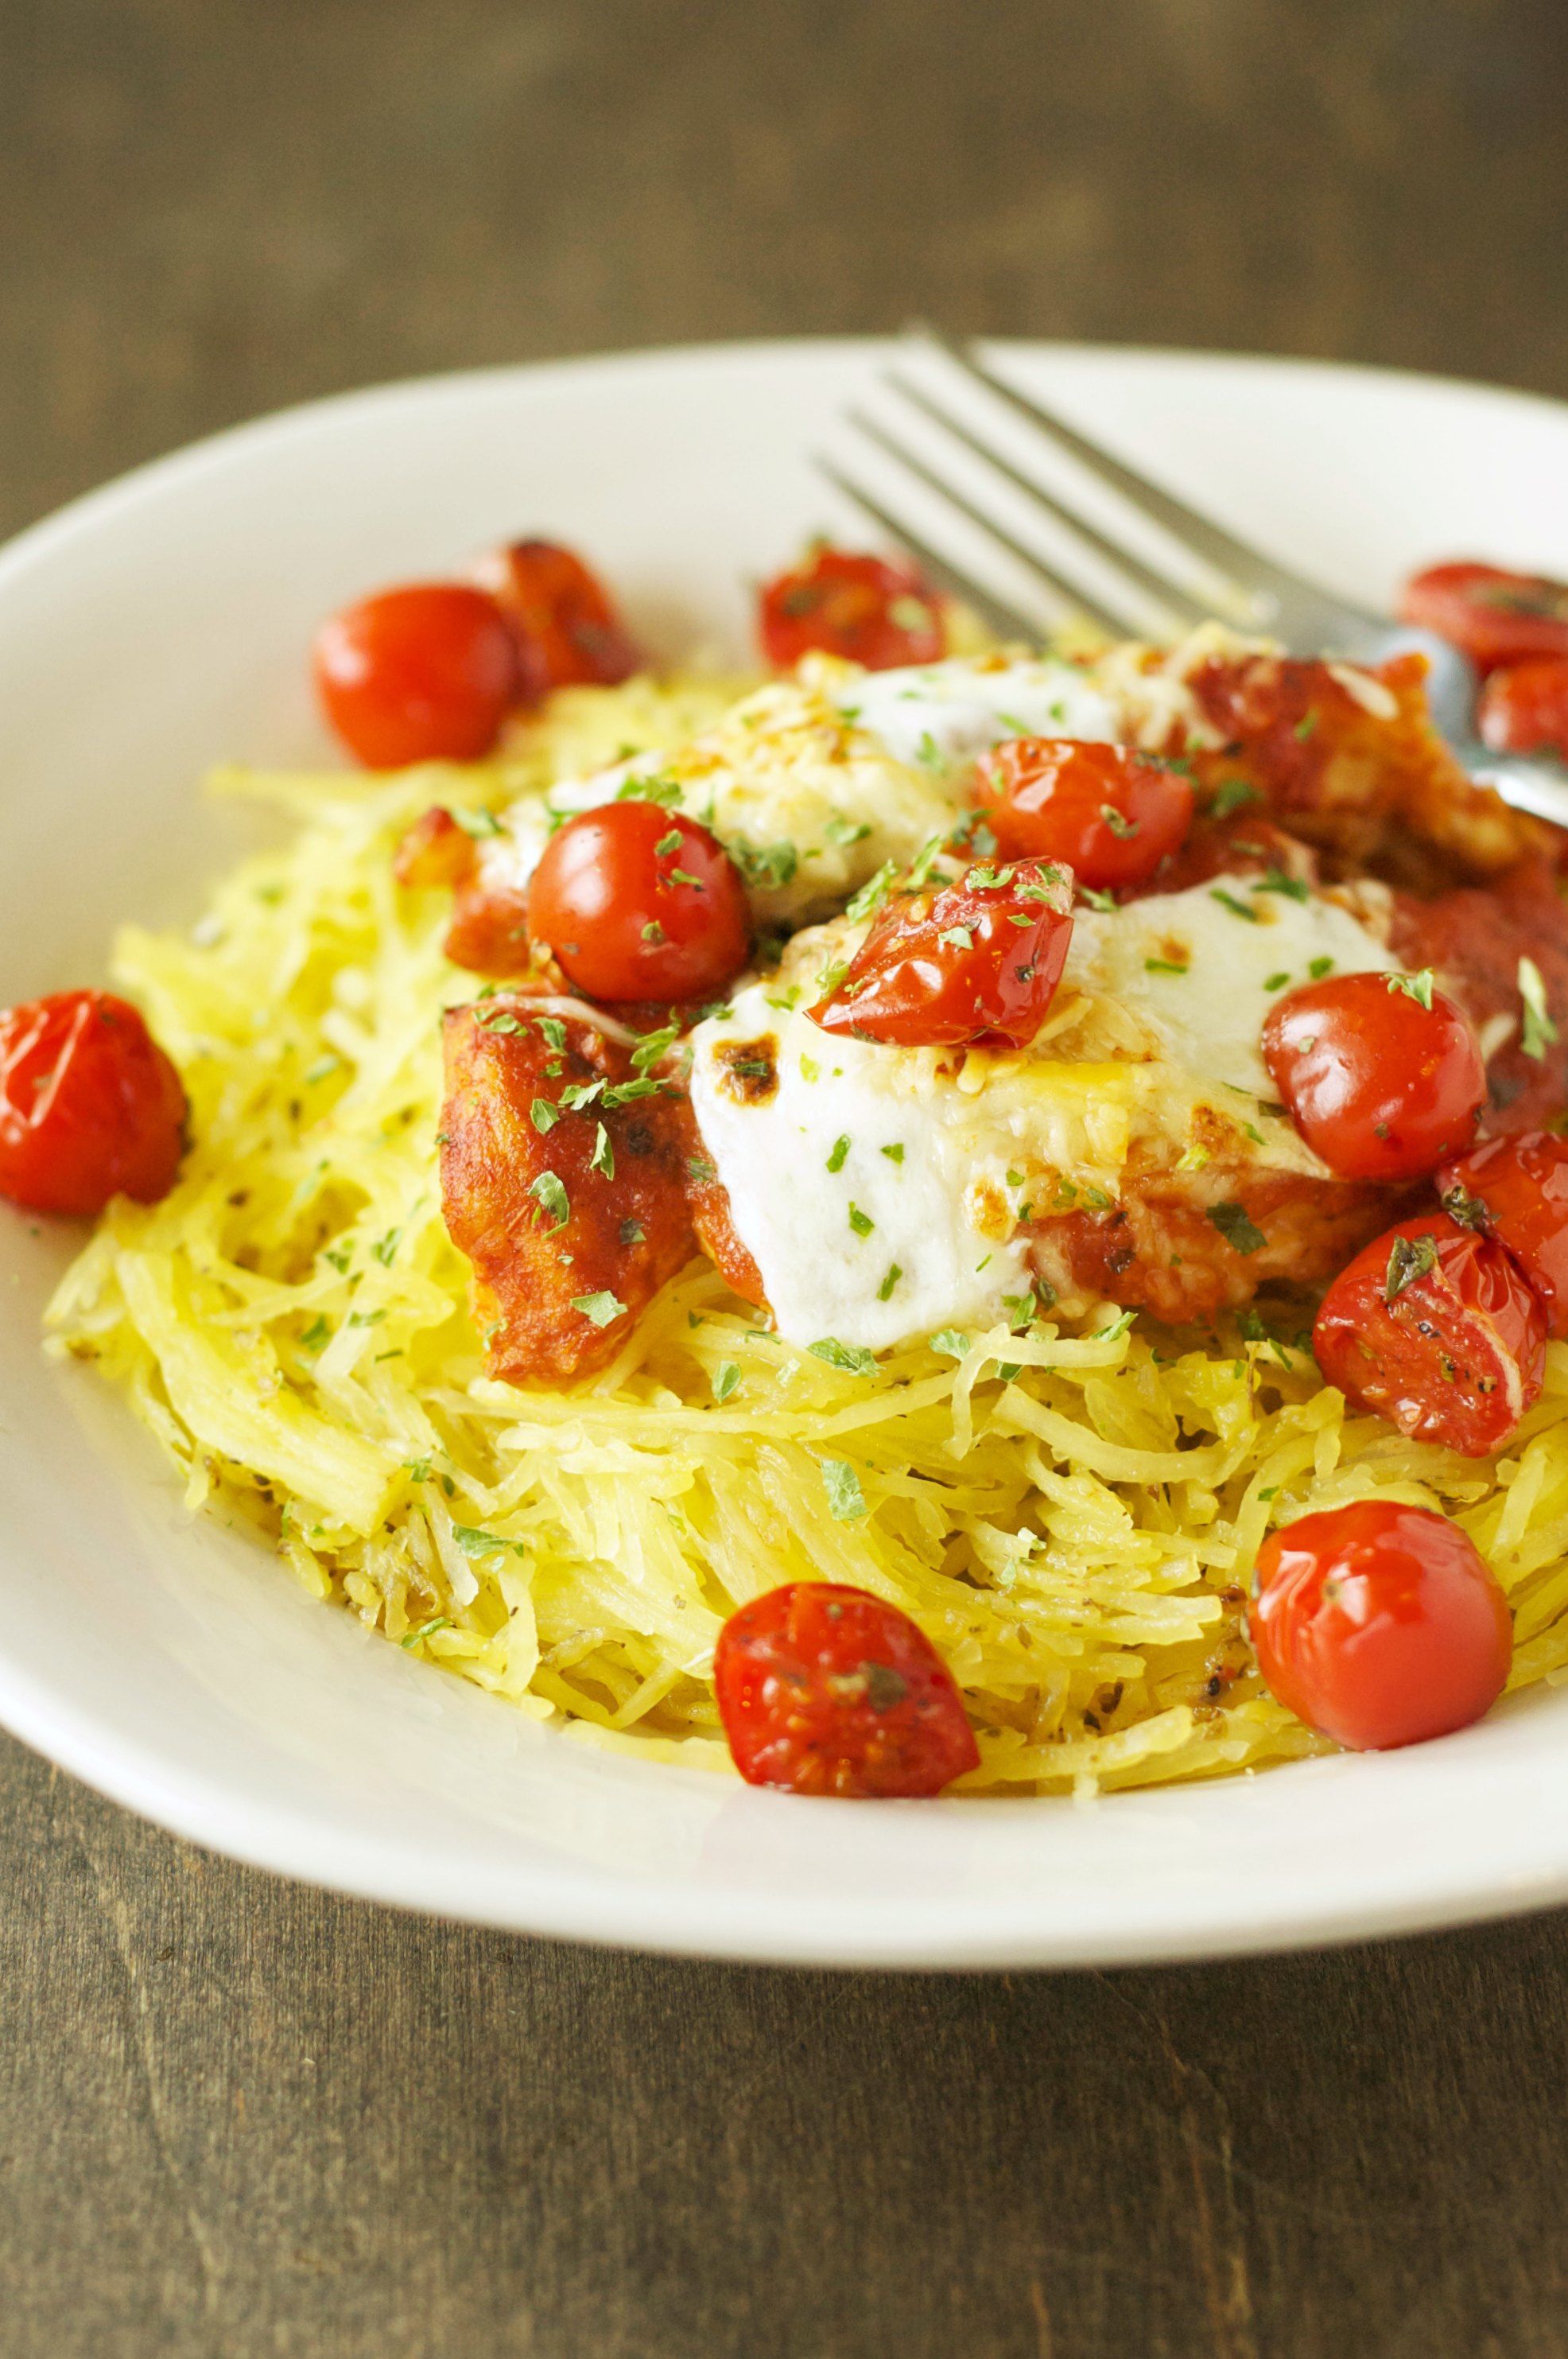 chicken and tomatoes on bed of spaghetti squash in white bowl